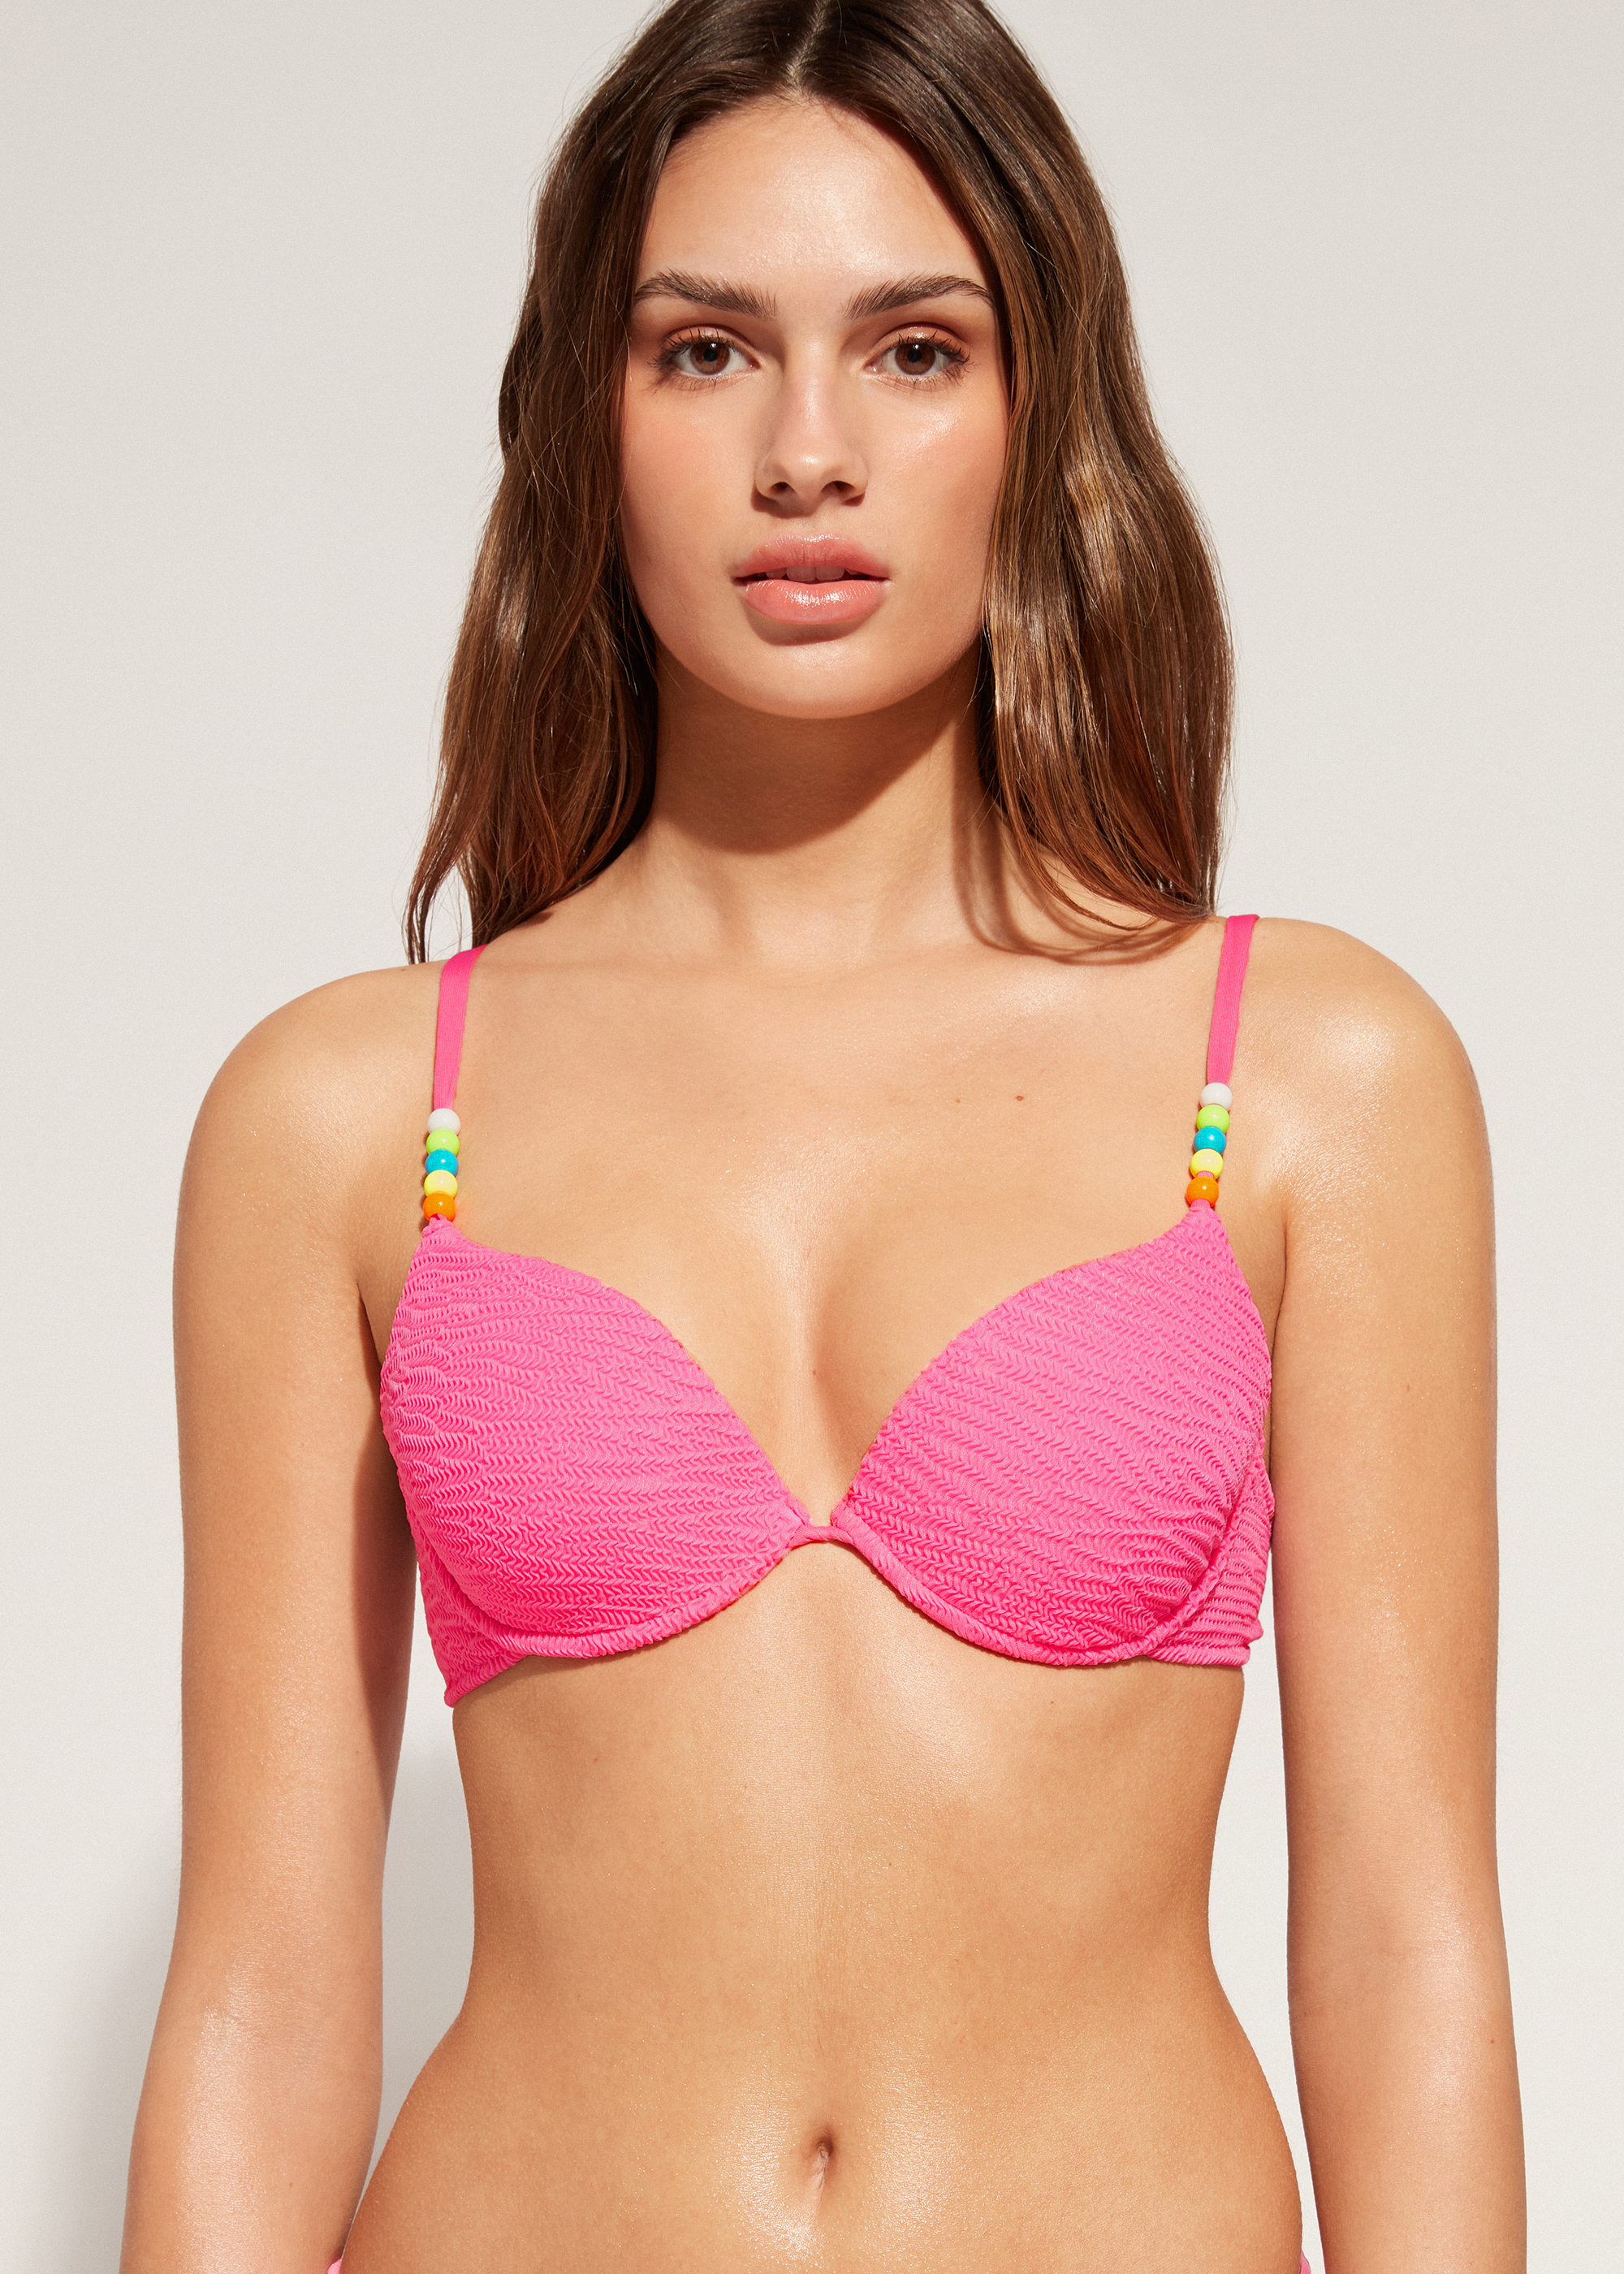 Padded Push-Up Swimsuit Top San Diego - Calzedonia